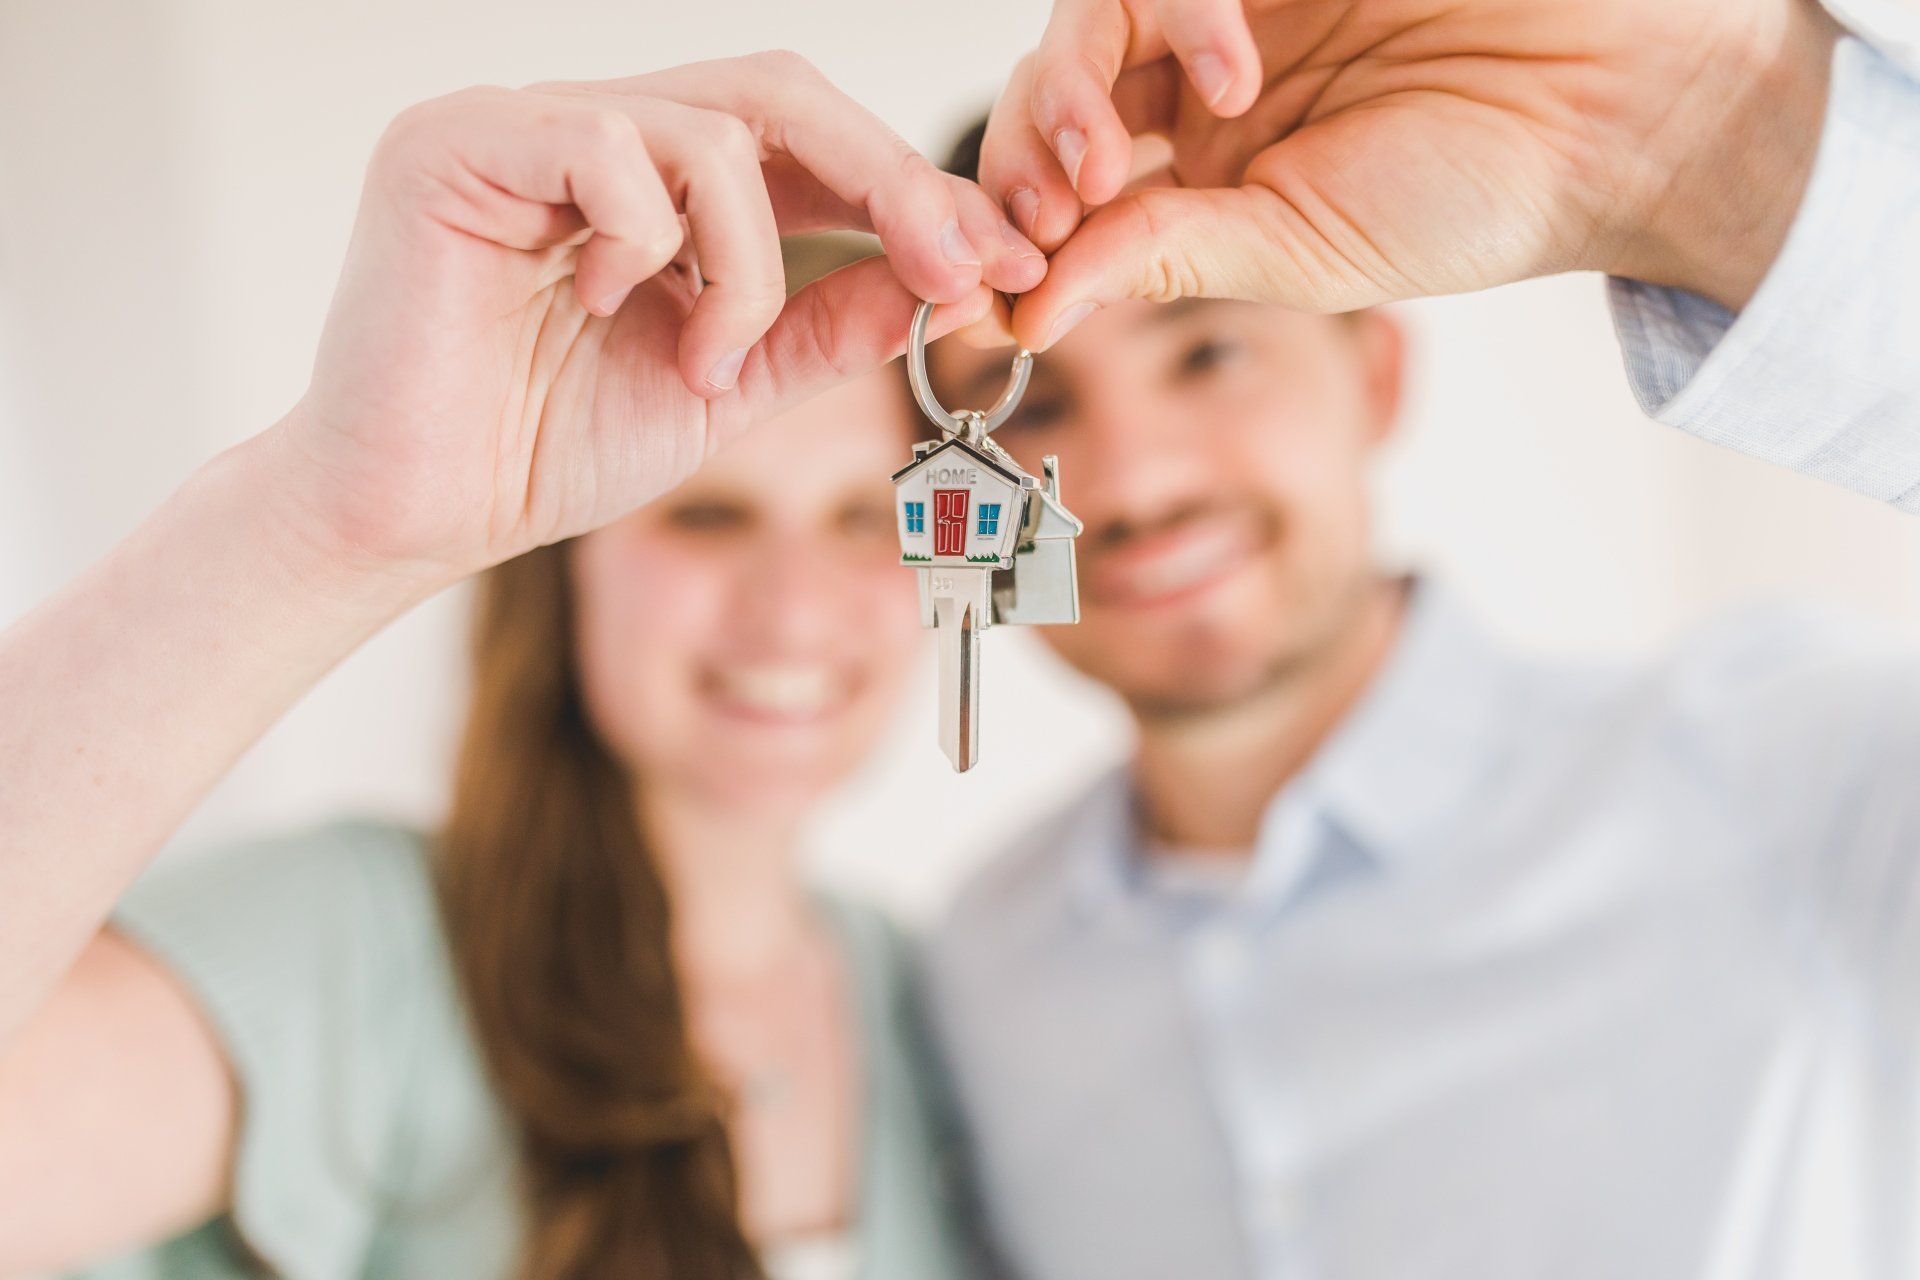 A man and a woman are holding keys to their new home.